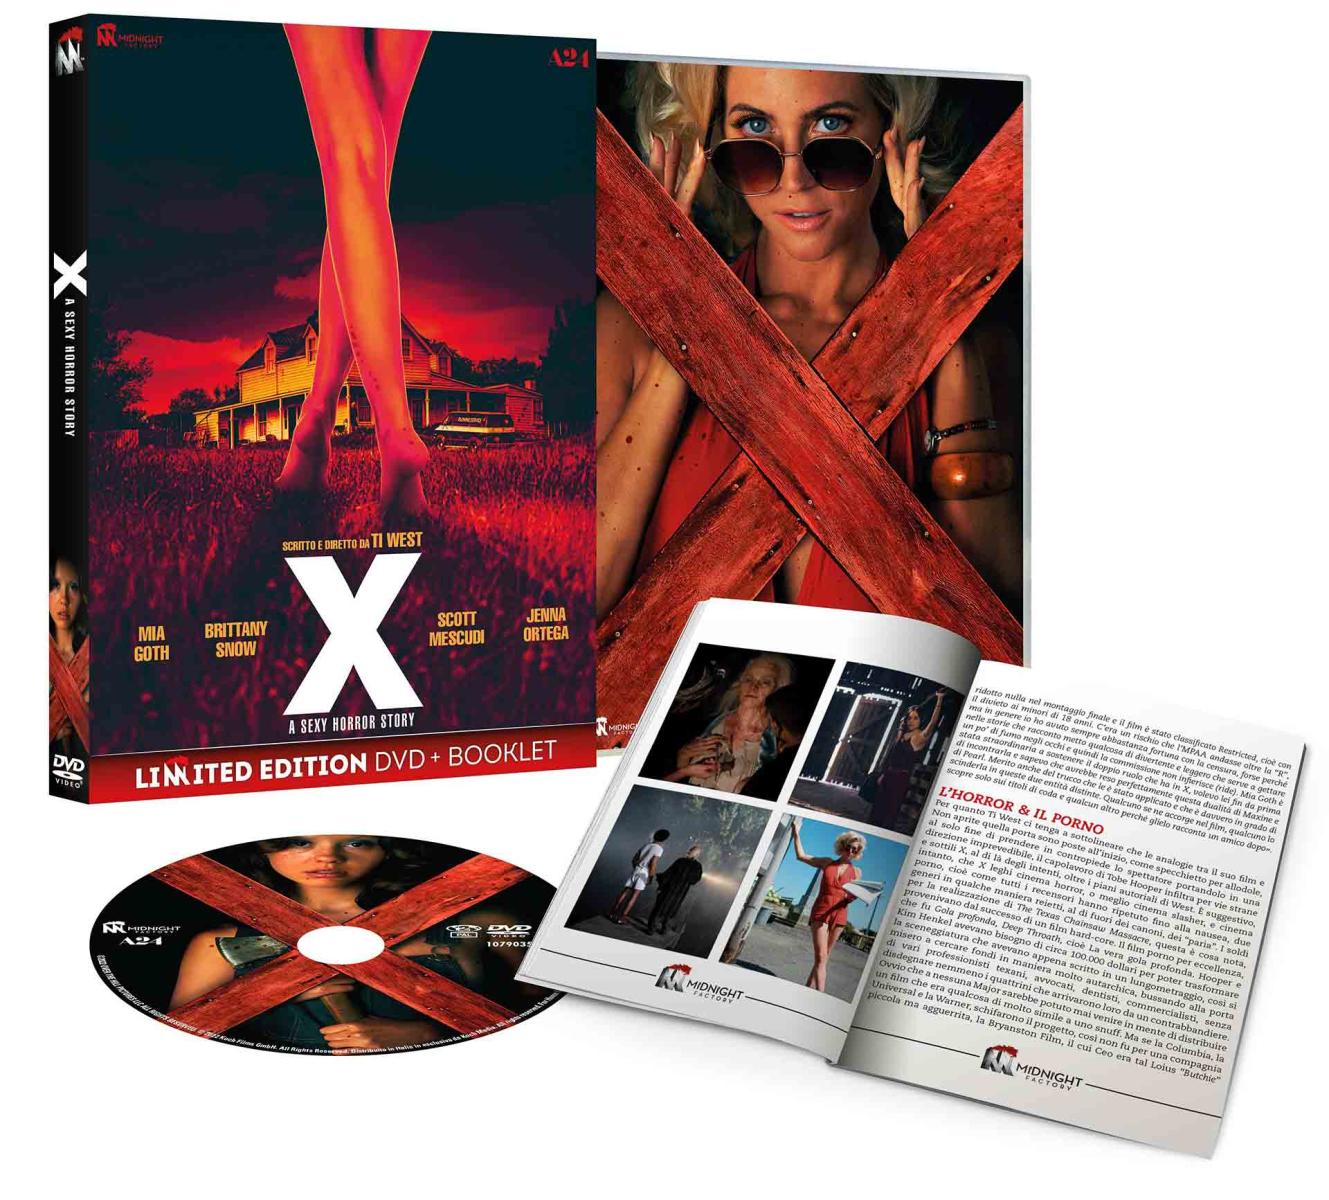 X - A Sexy Horror Story - Limited Edition DVD + Booklet - VM18 (DVD) Image 3